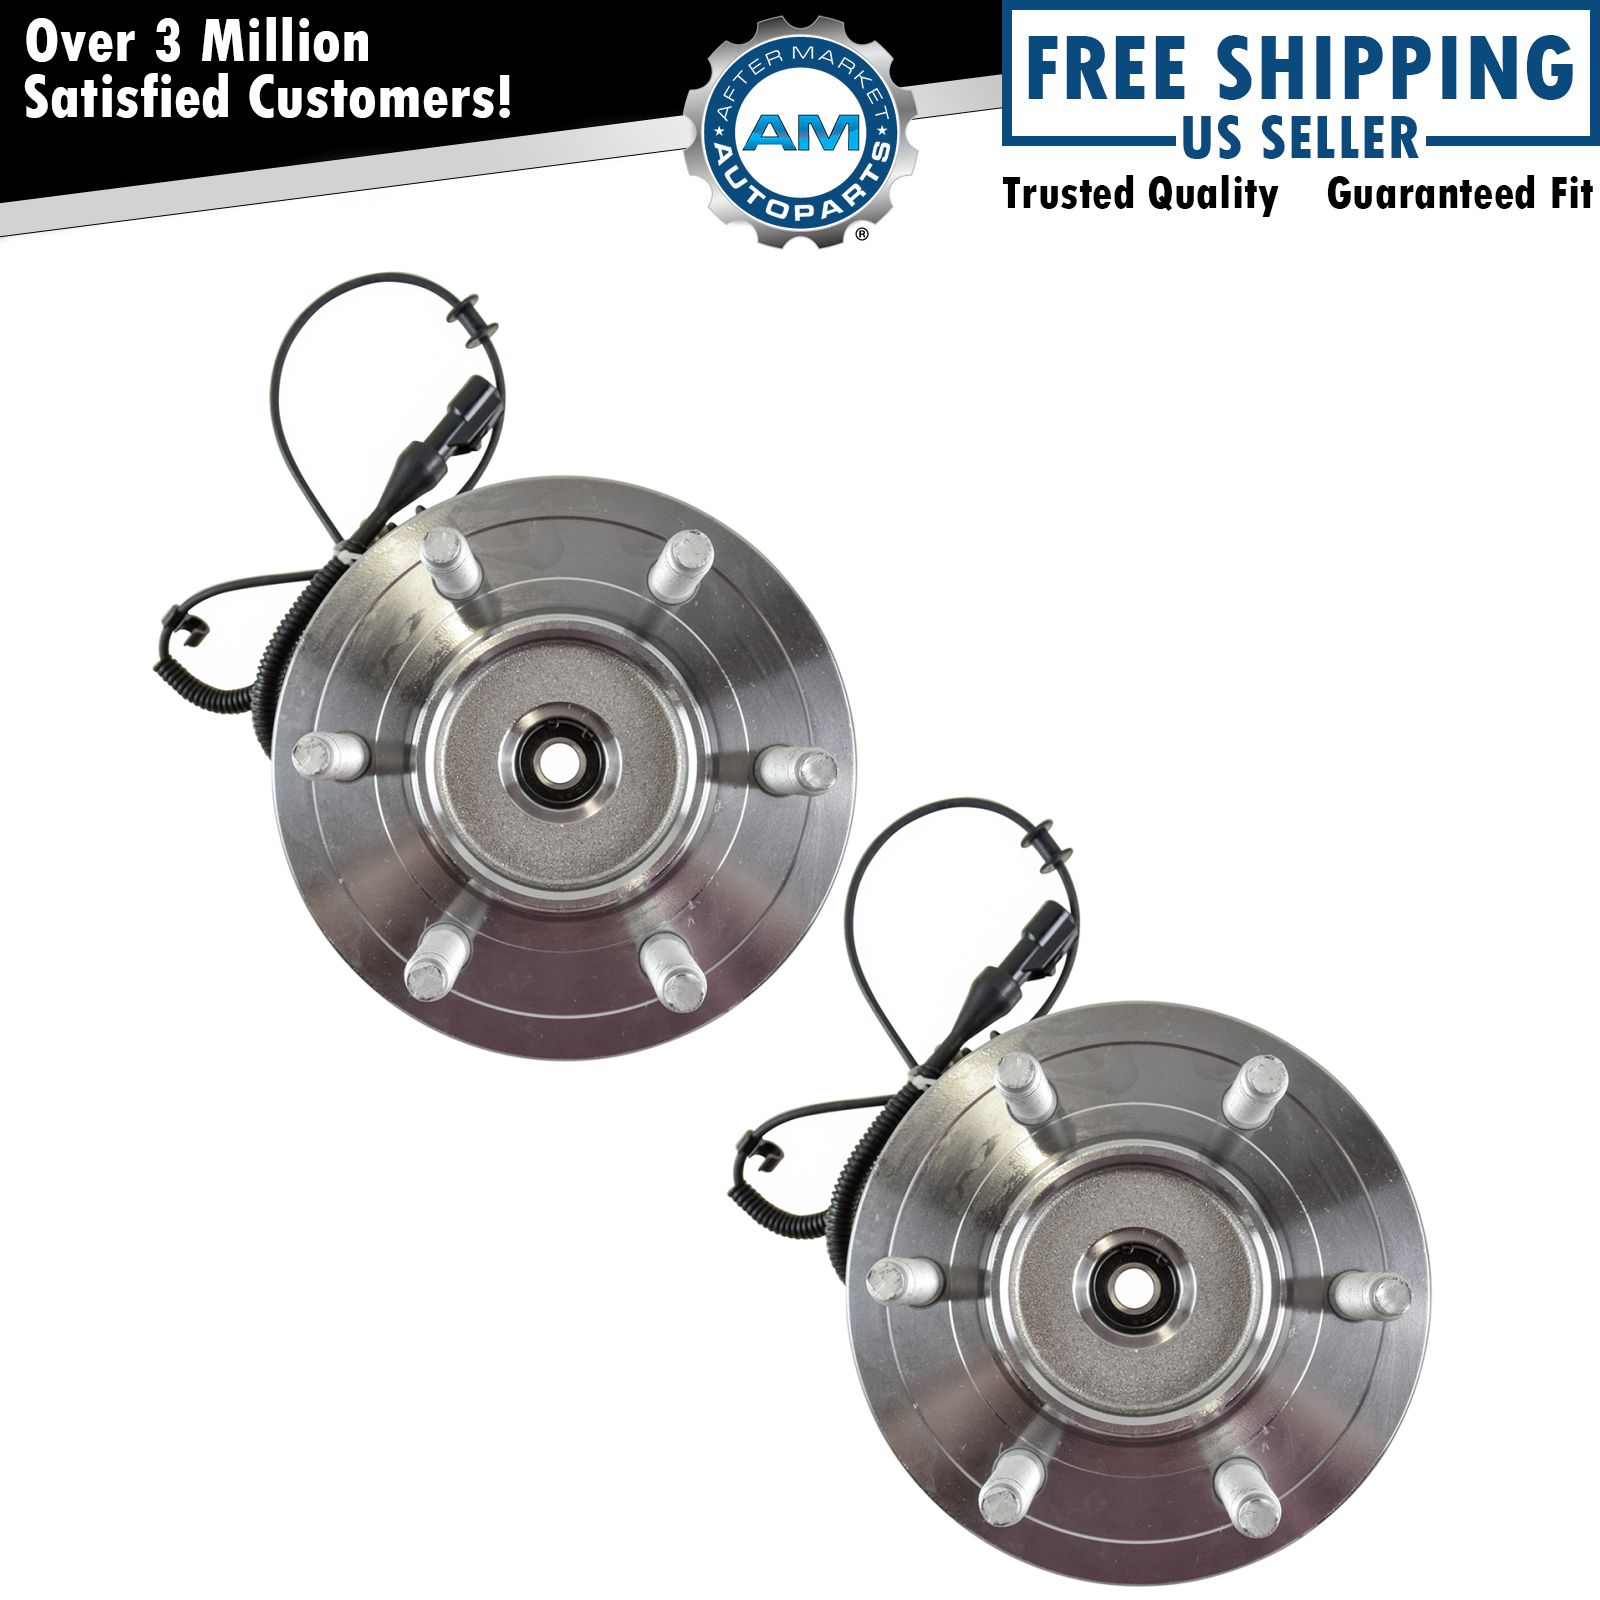 2 Front Wheel Bearing Hub Assembly 4x4 2005 - 2008 Ford F-150 & Lincoln Mark LT